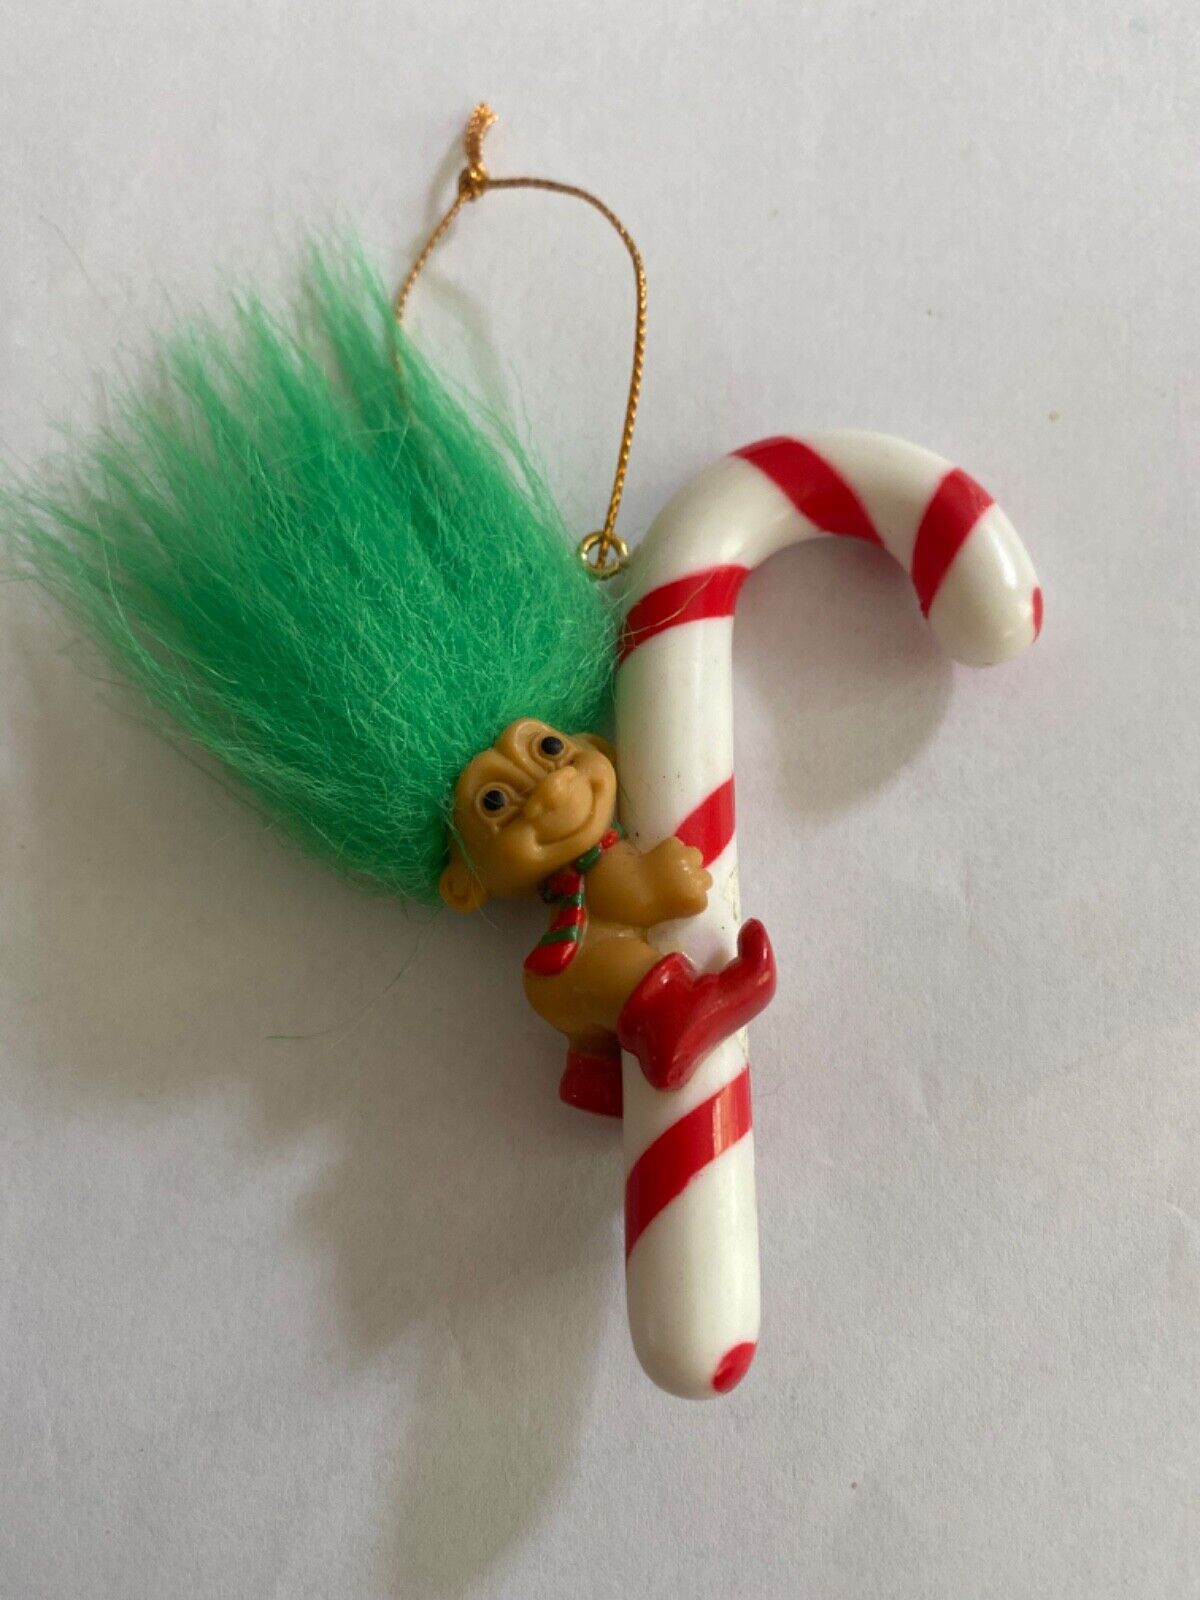 Vintage Russ Troll on Candy Cane Christmas Ornament, Green Hair